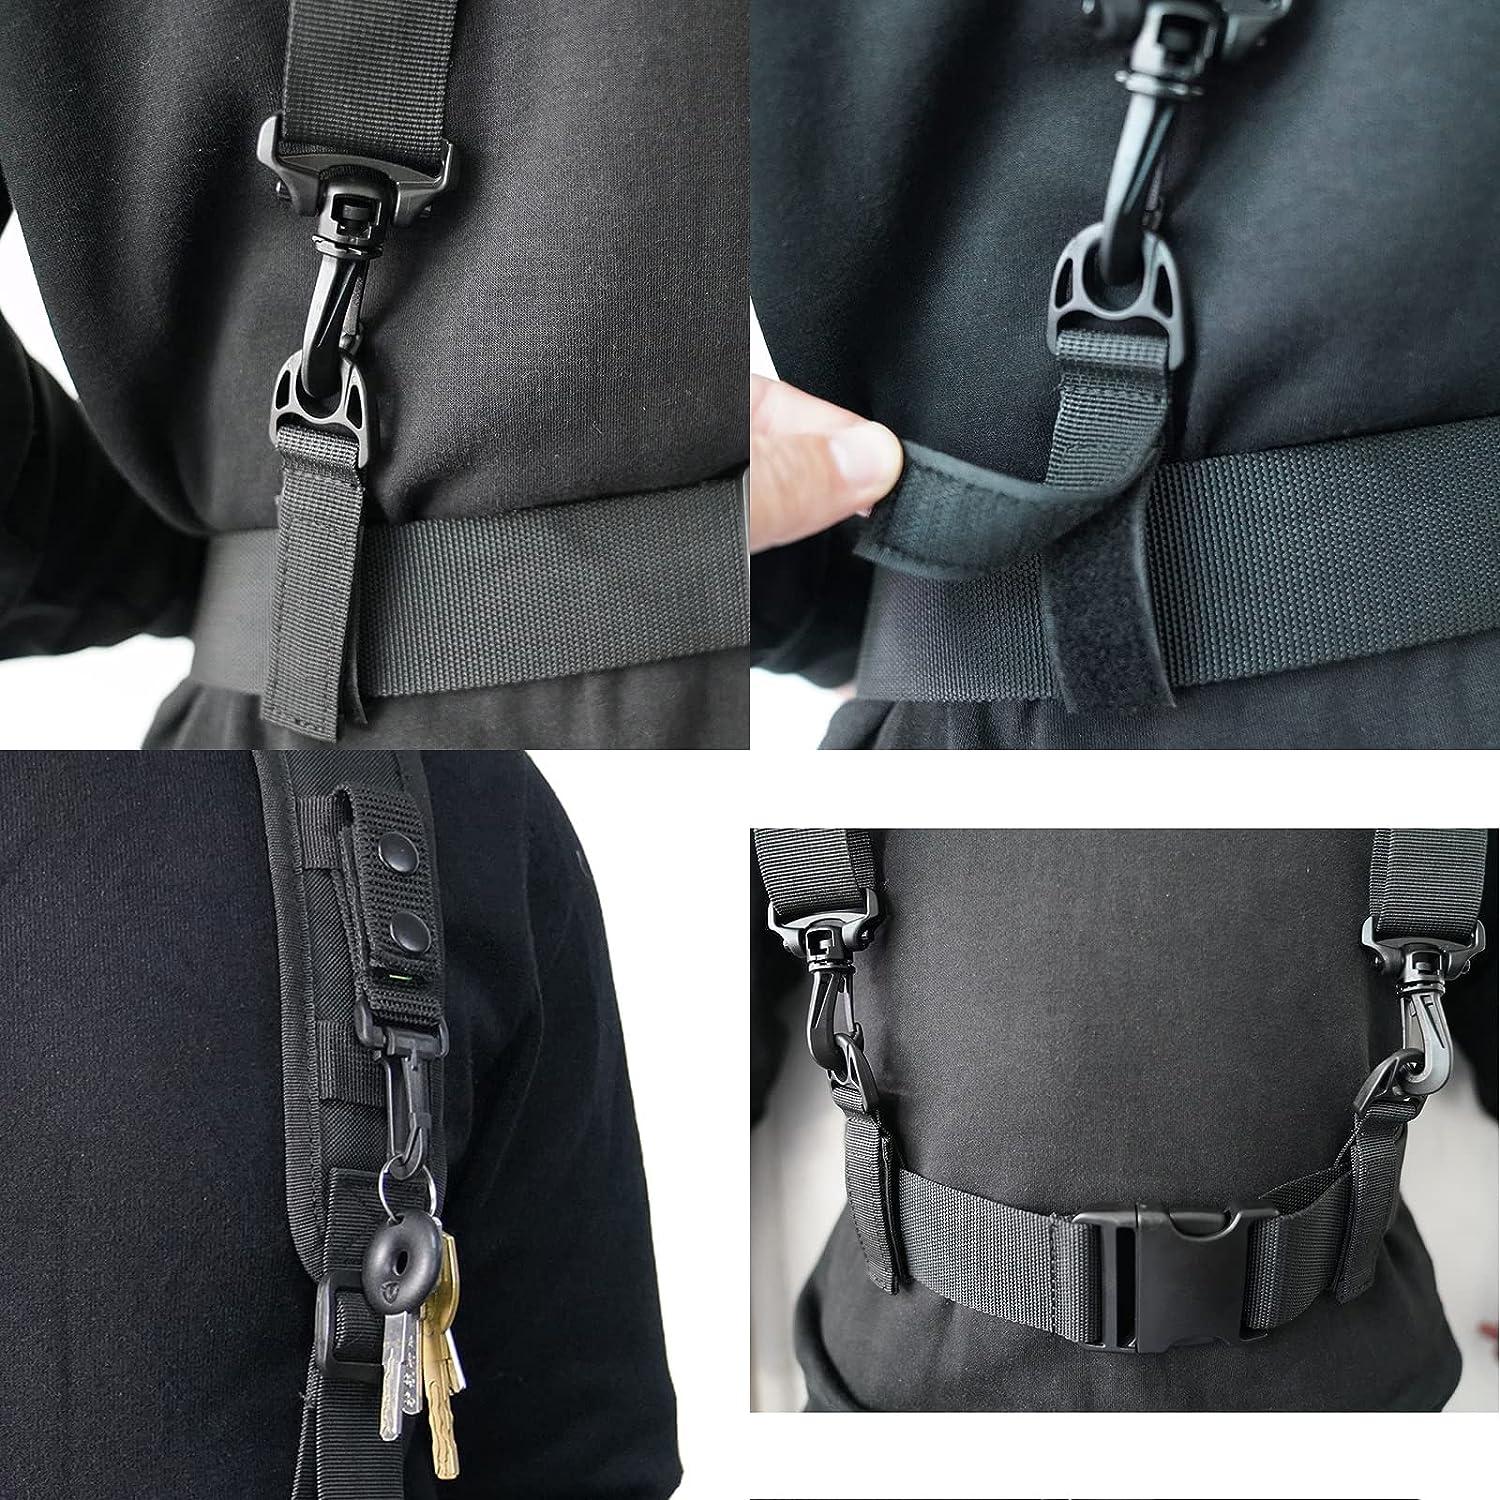 KUNN Tactical Suspenders Law Enforcement Police Harness for Duty